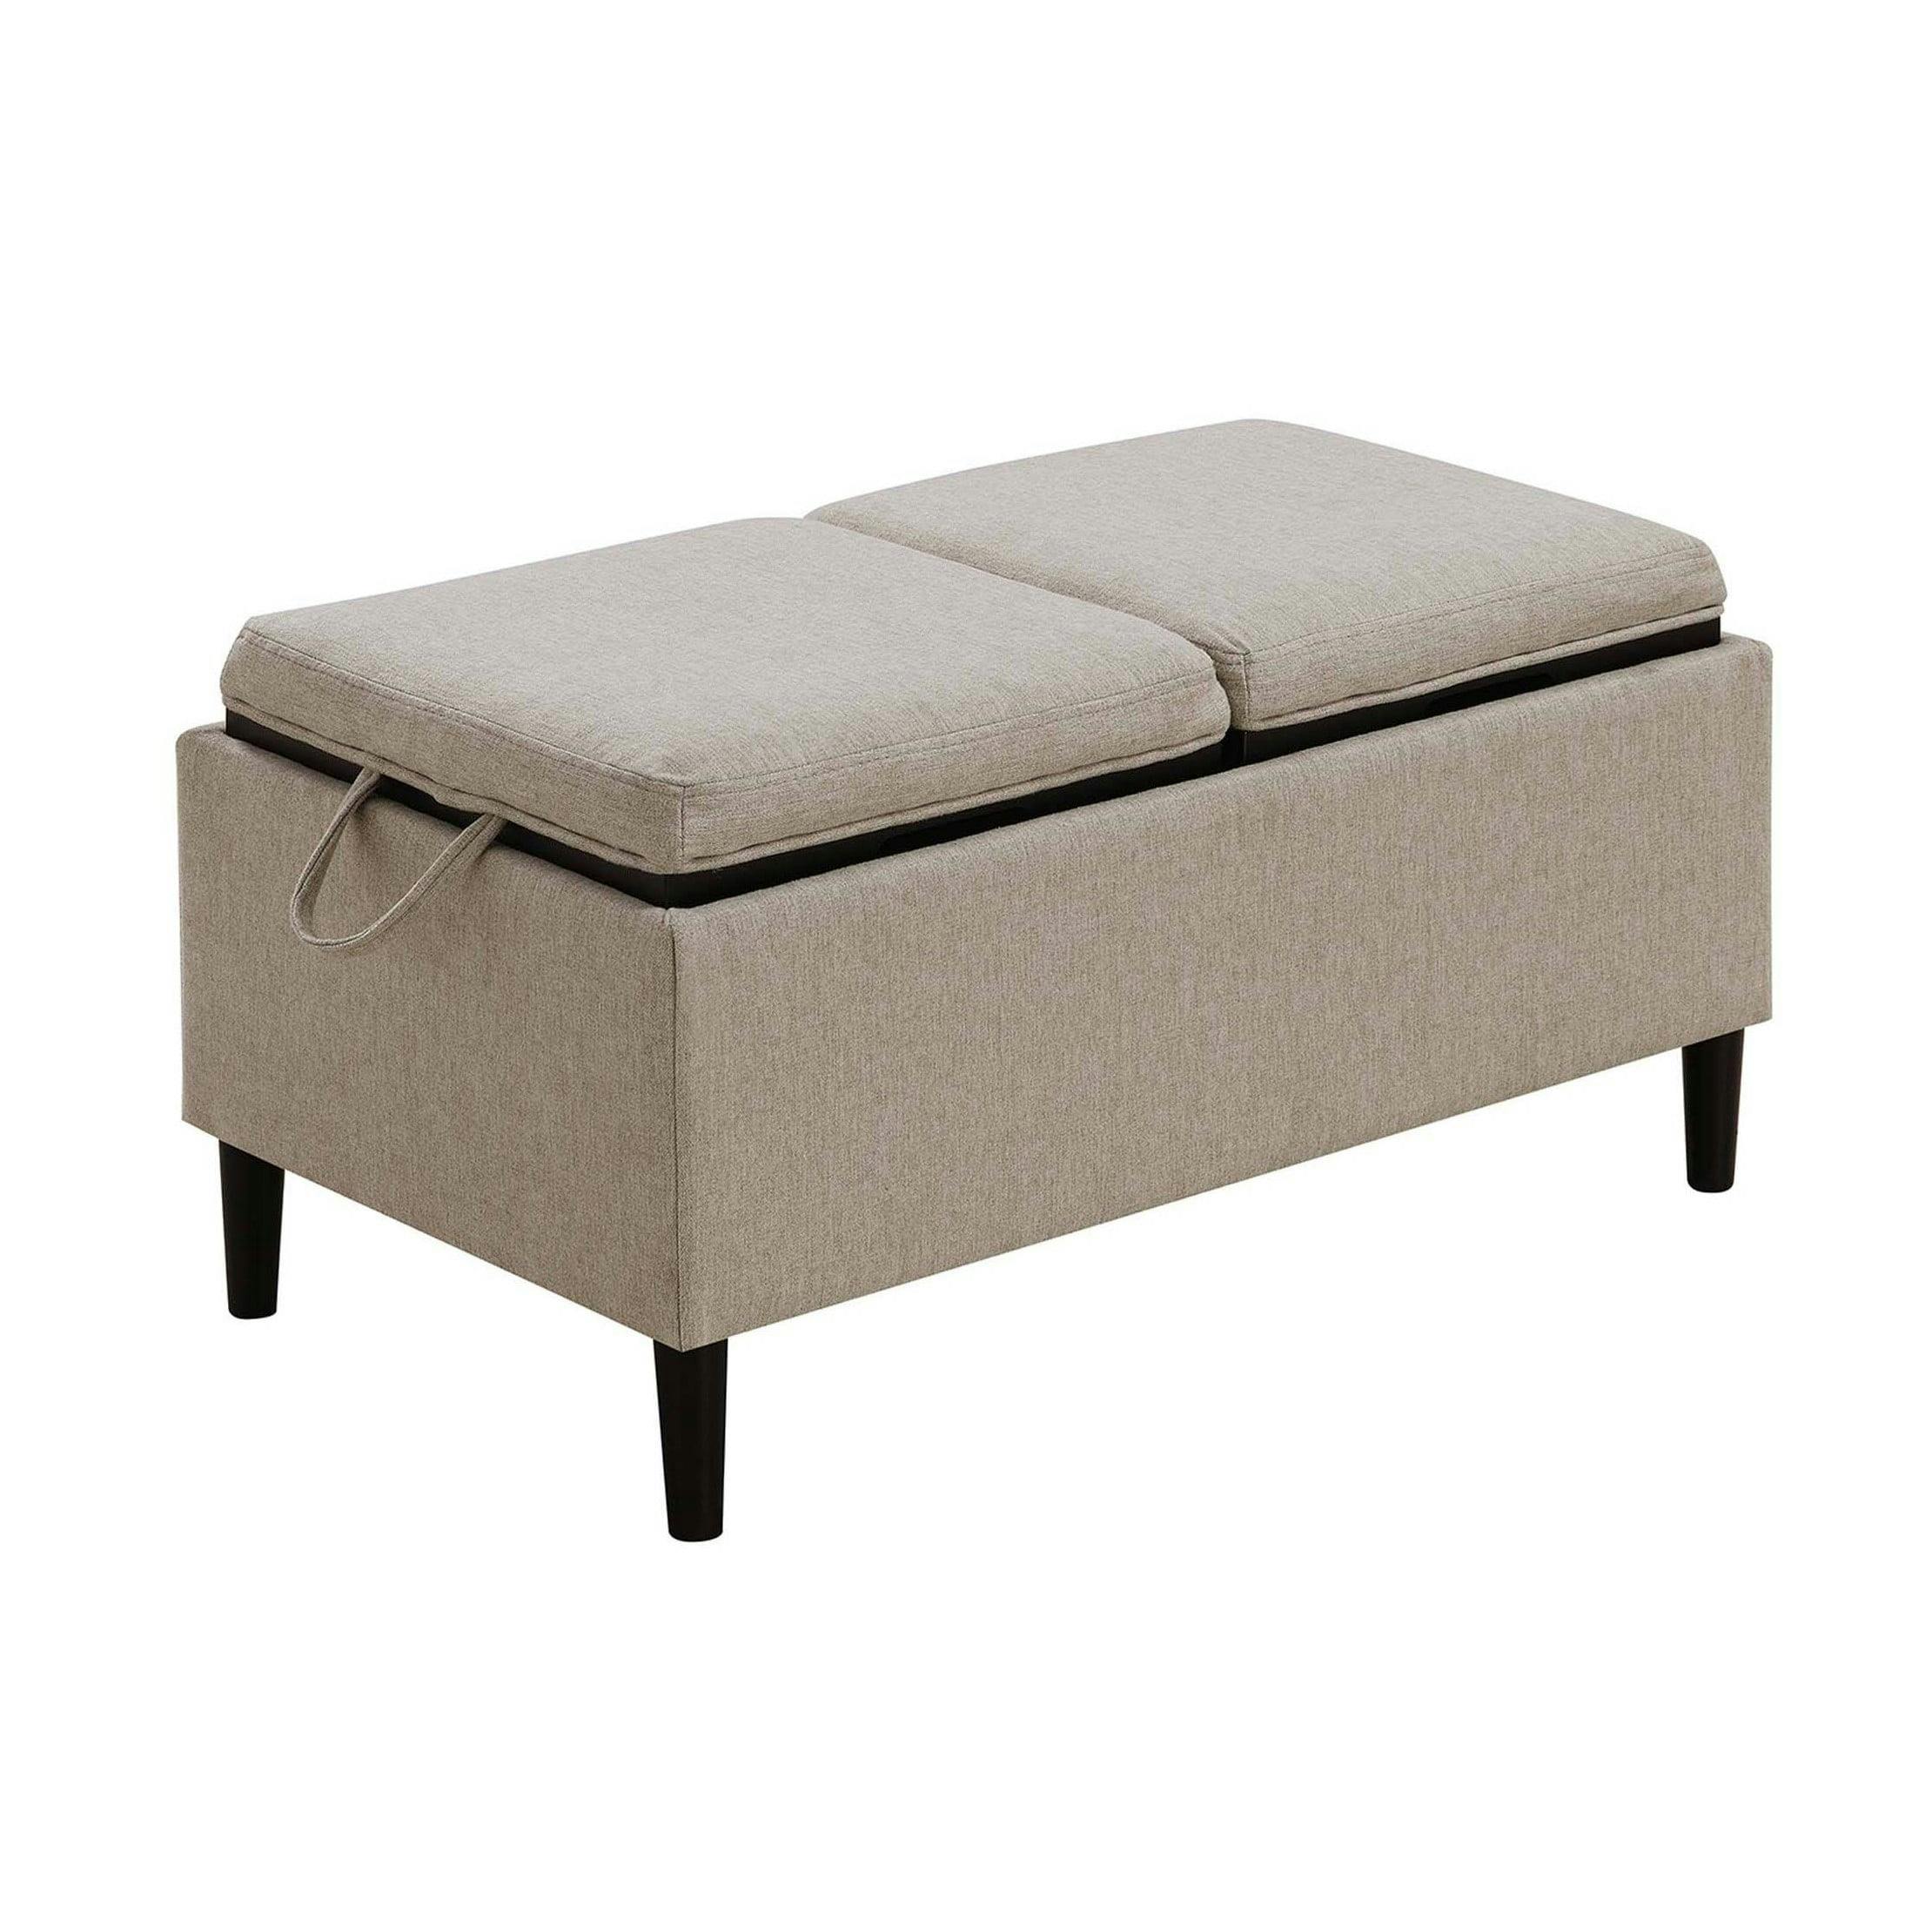 Soft Beige Fabric Magnolia Storage Ottoman with Reversible Tray Tops